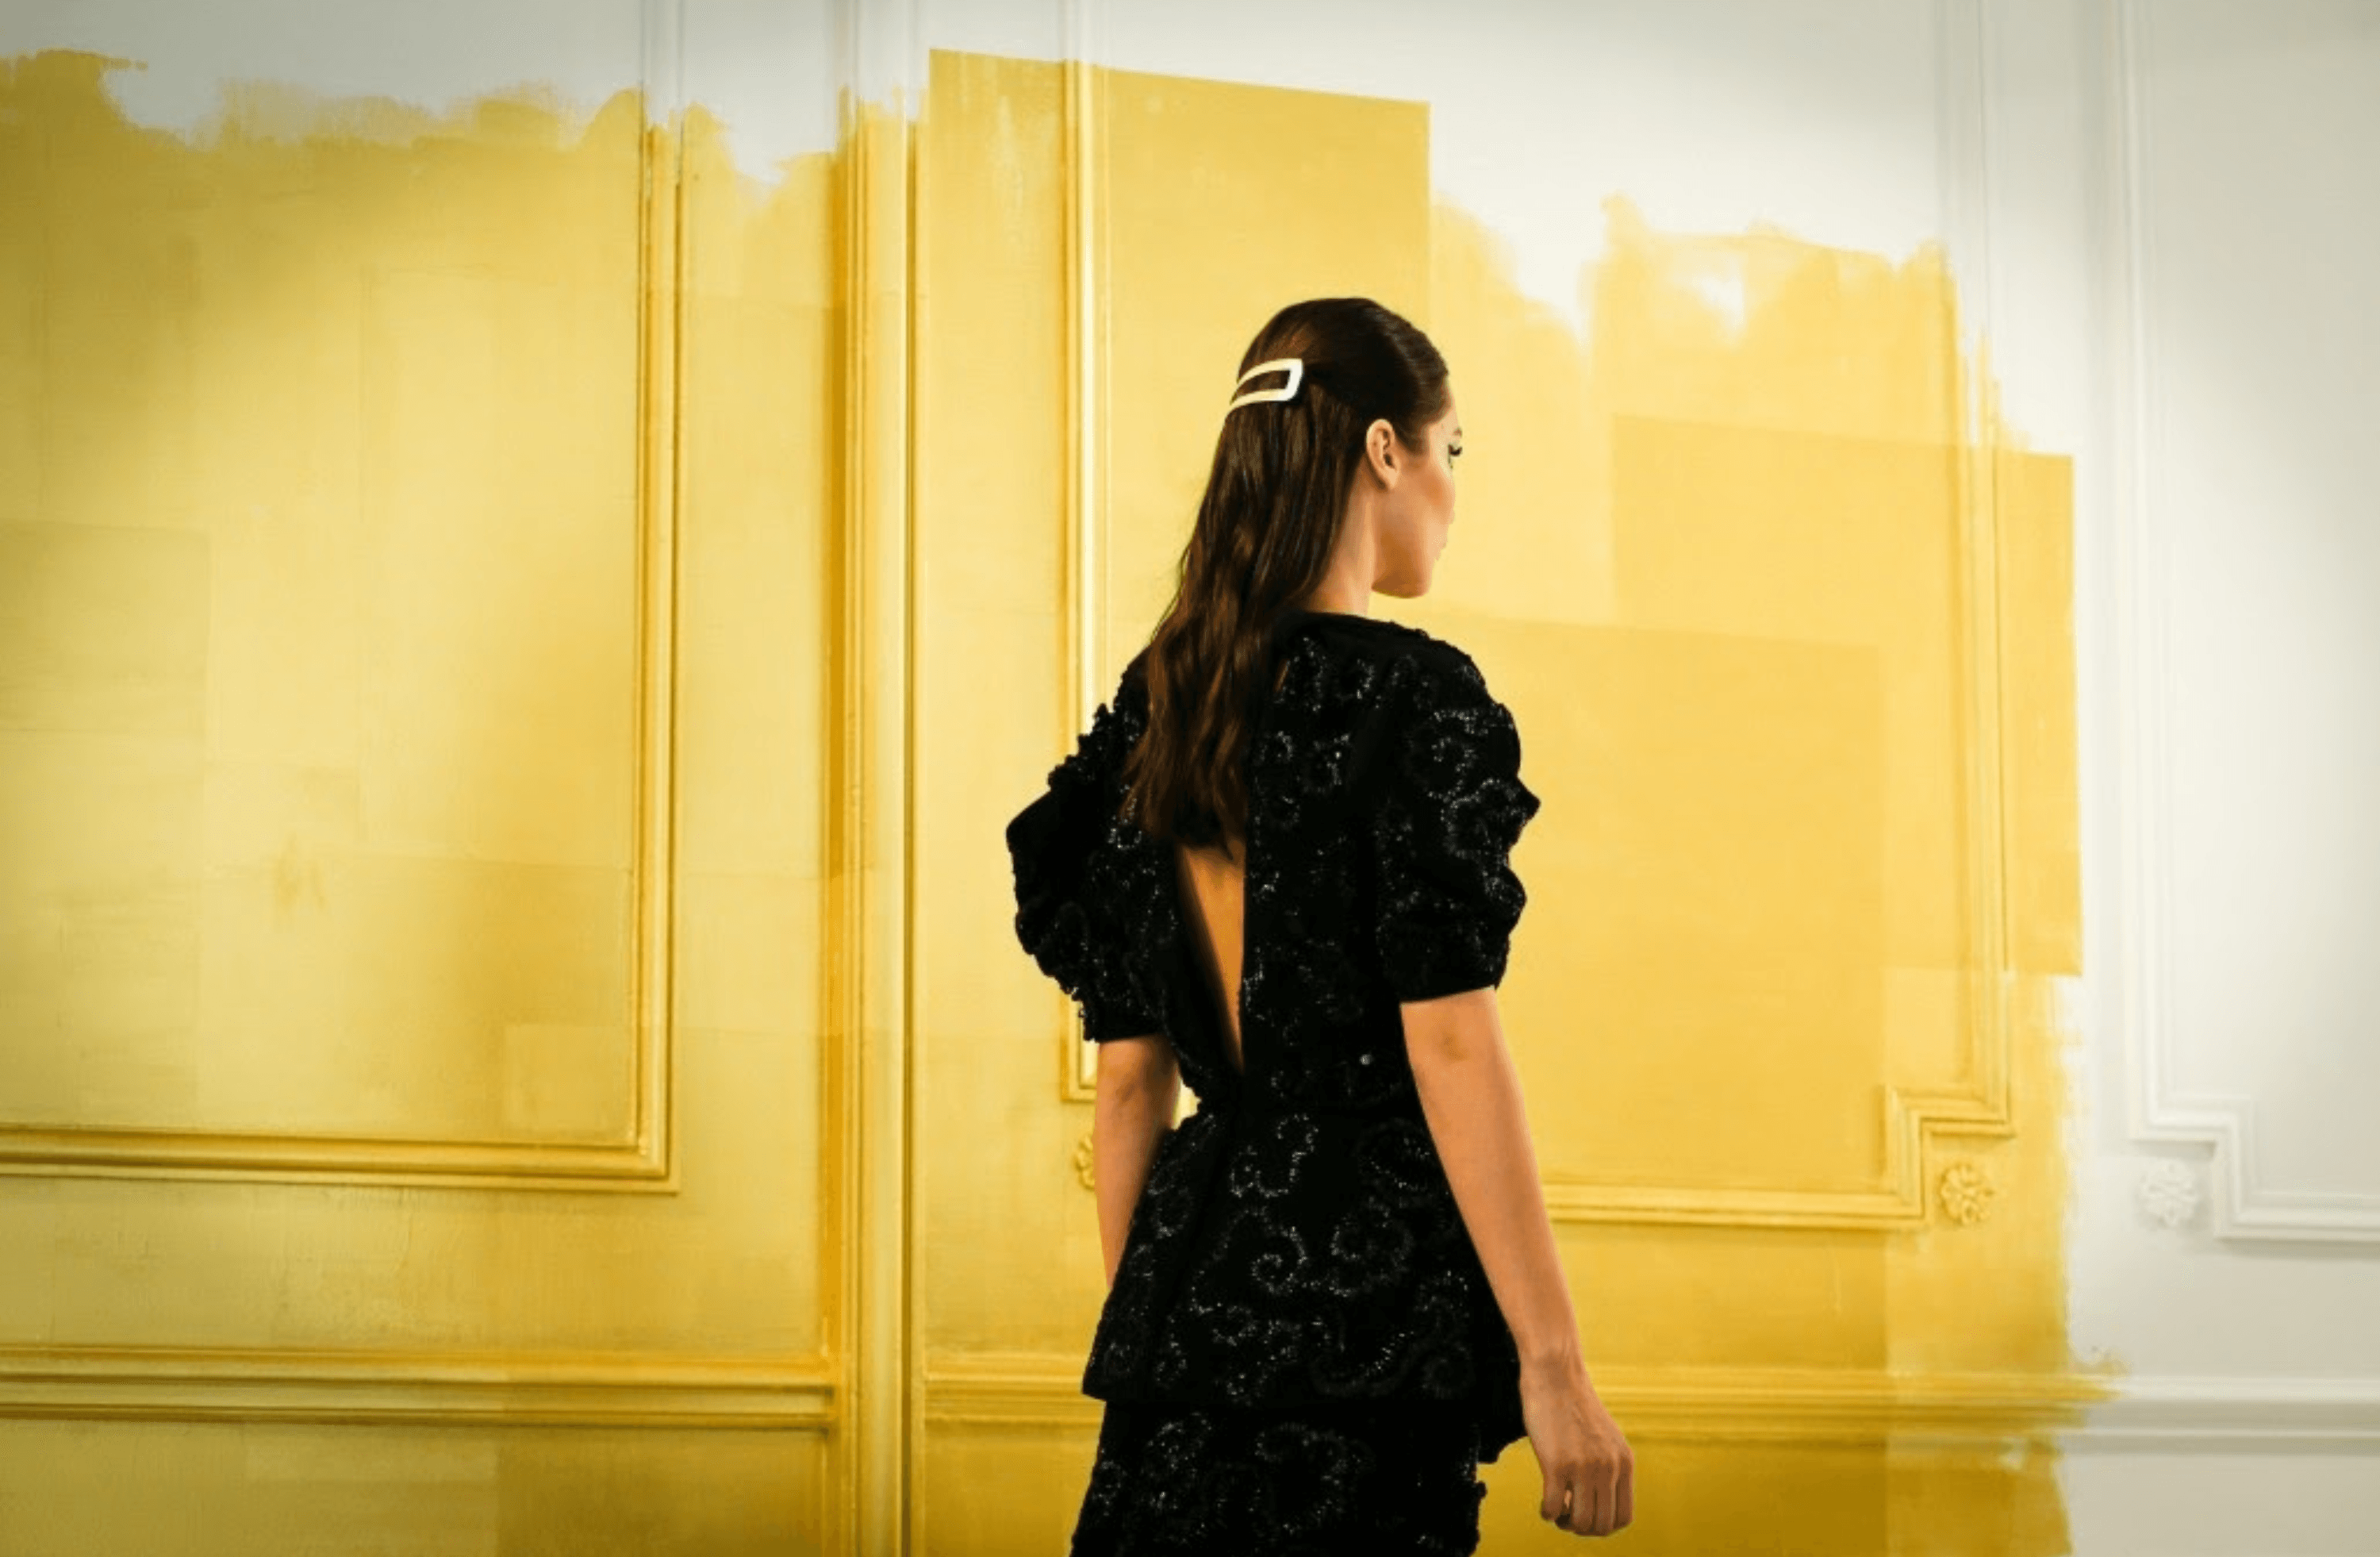 For Blog Only - Stock - Yellow Half Painted Wall